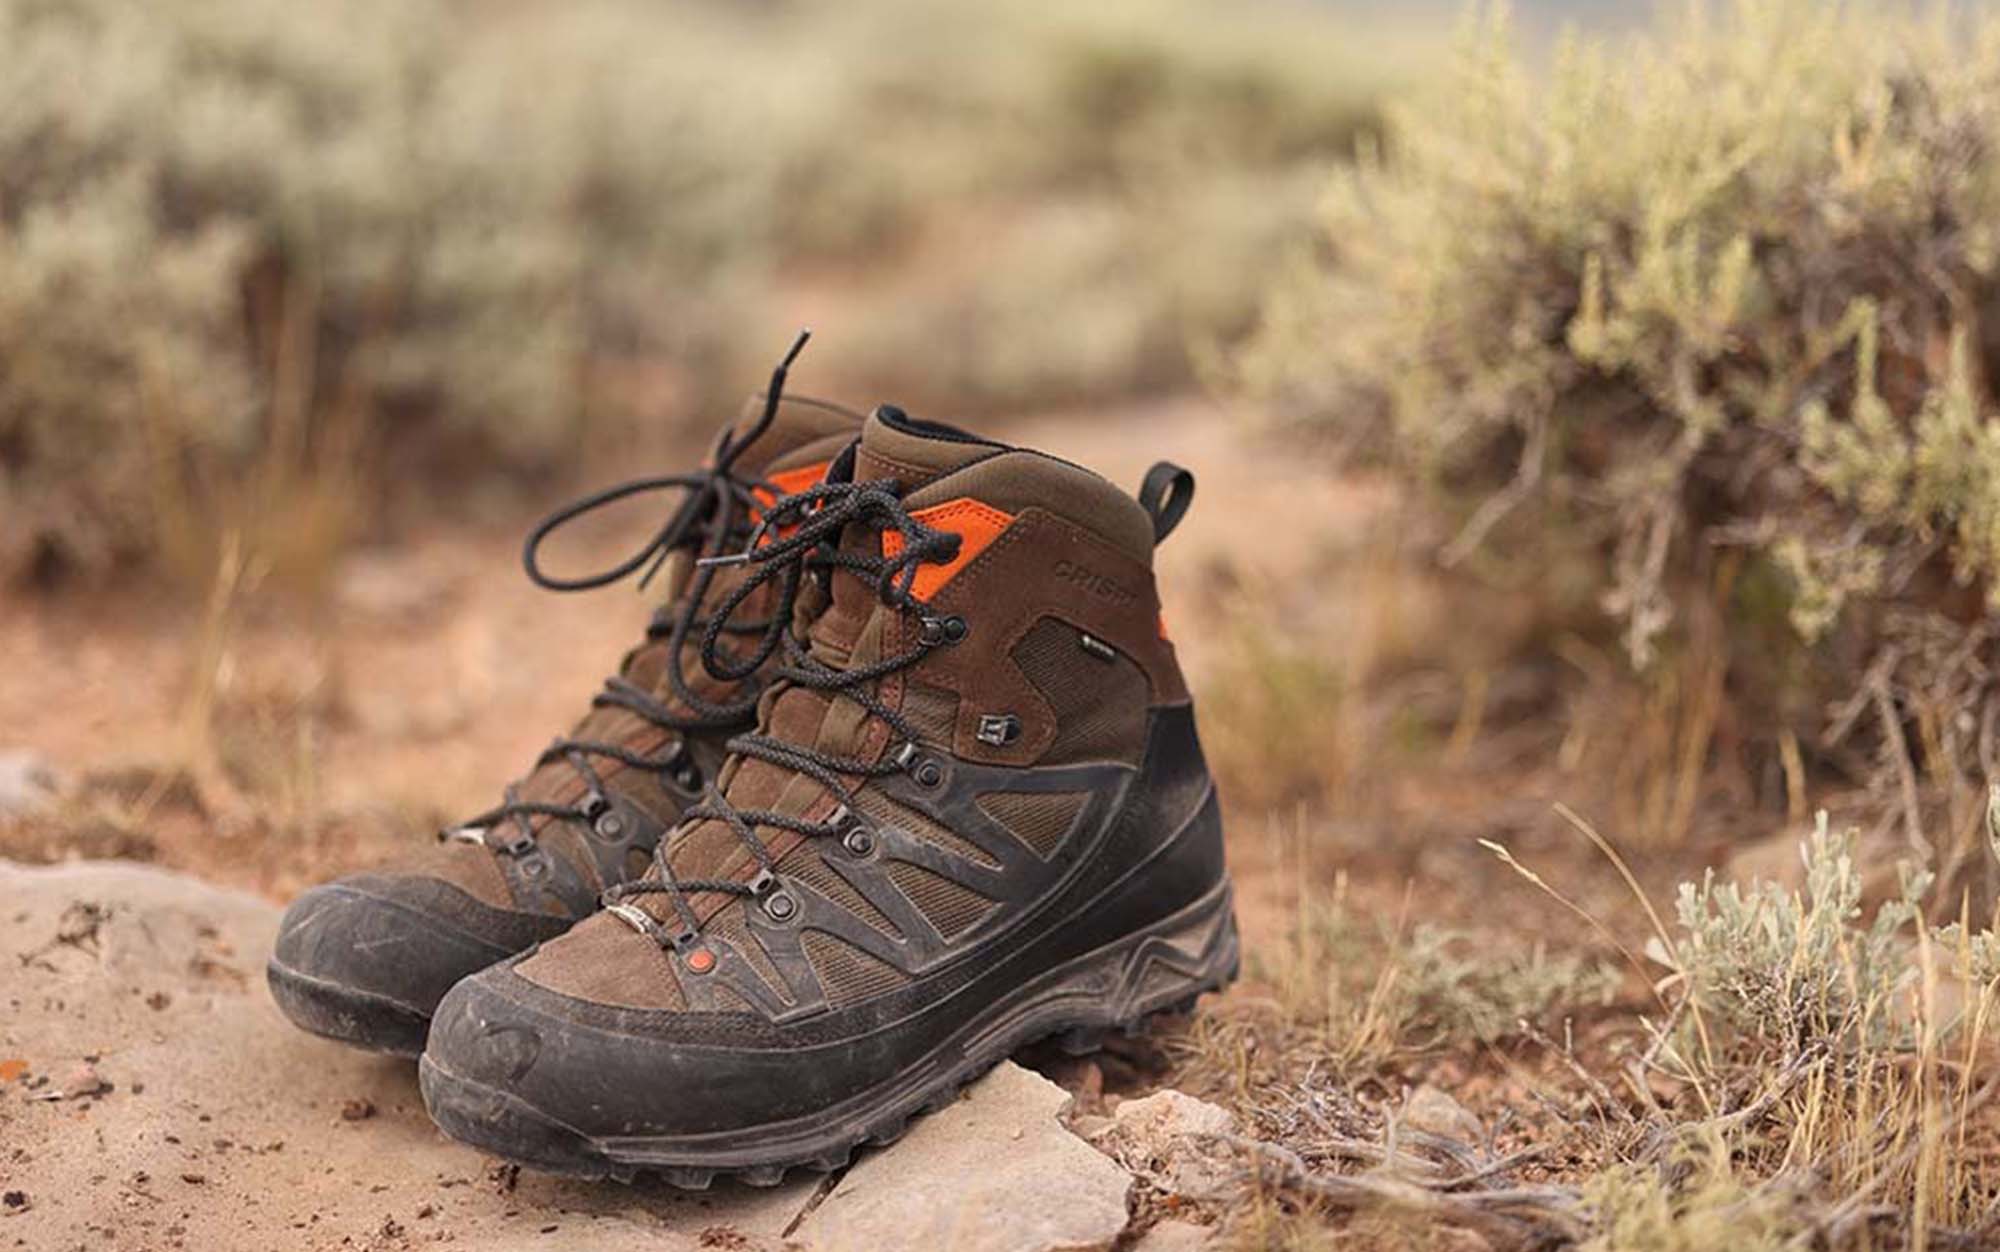 Crispi Wyoming II GTX boots on the trail.